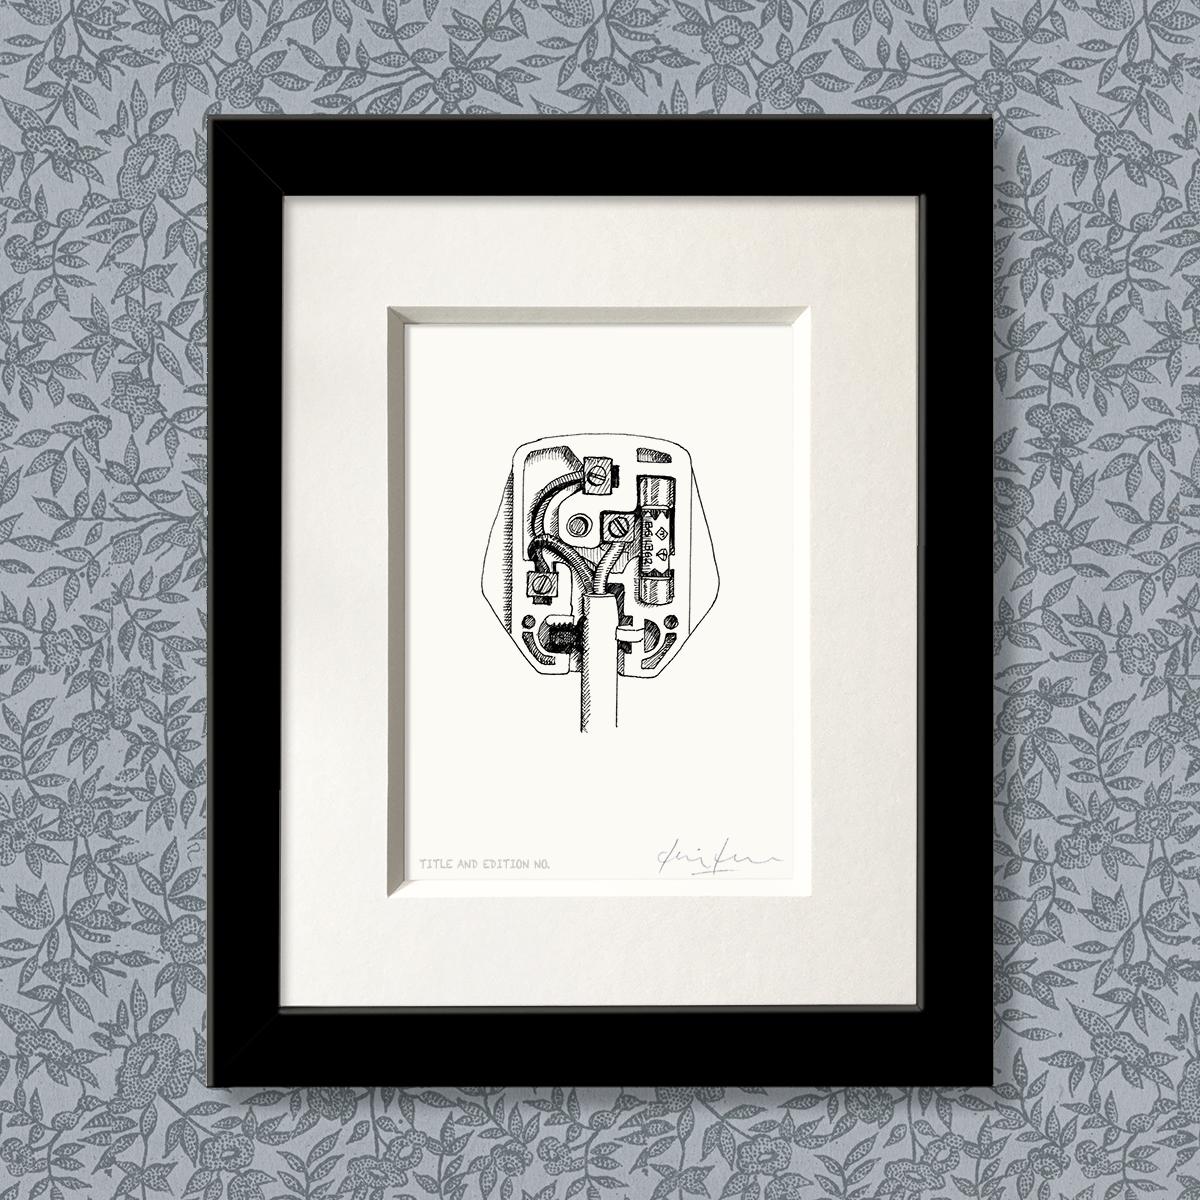 Limited edition print from pen and ink drawing of a 13 amp plug in a black frame